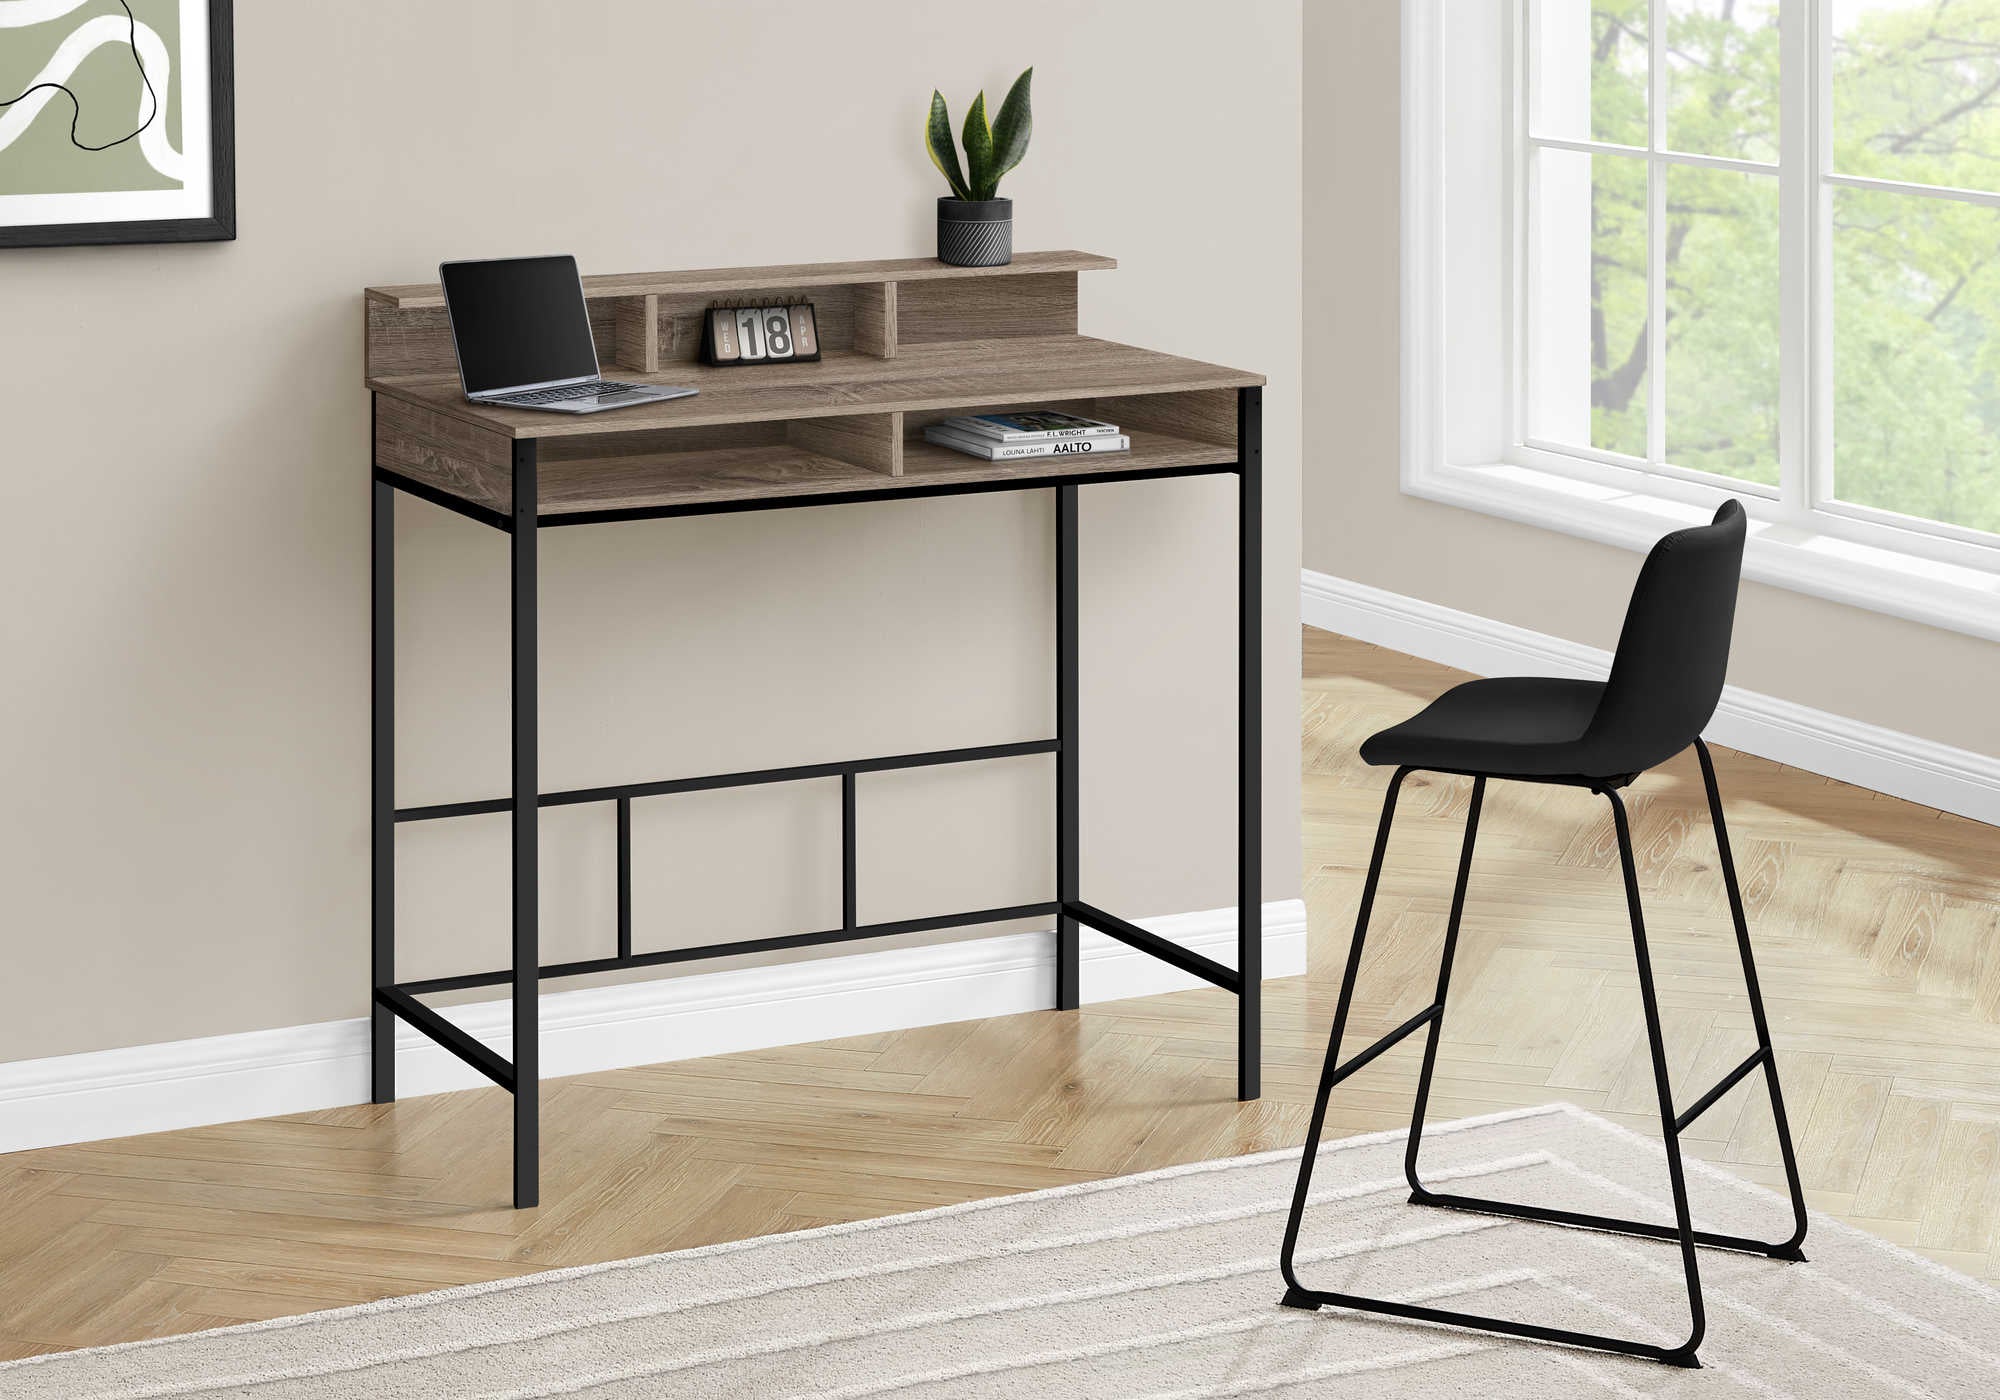 I 7702 - COMPUTER DESK ONLY - 48"L / DARK TAUPE / BLACK STANDING HEIGHT BY MONARCH SPECIALTIES INC